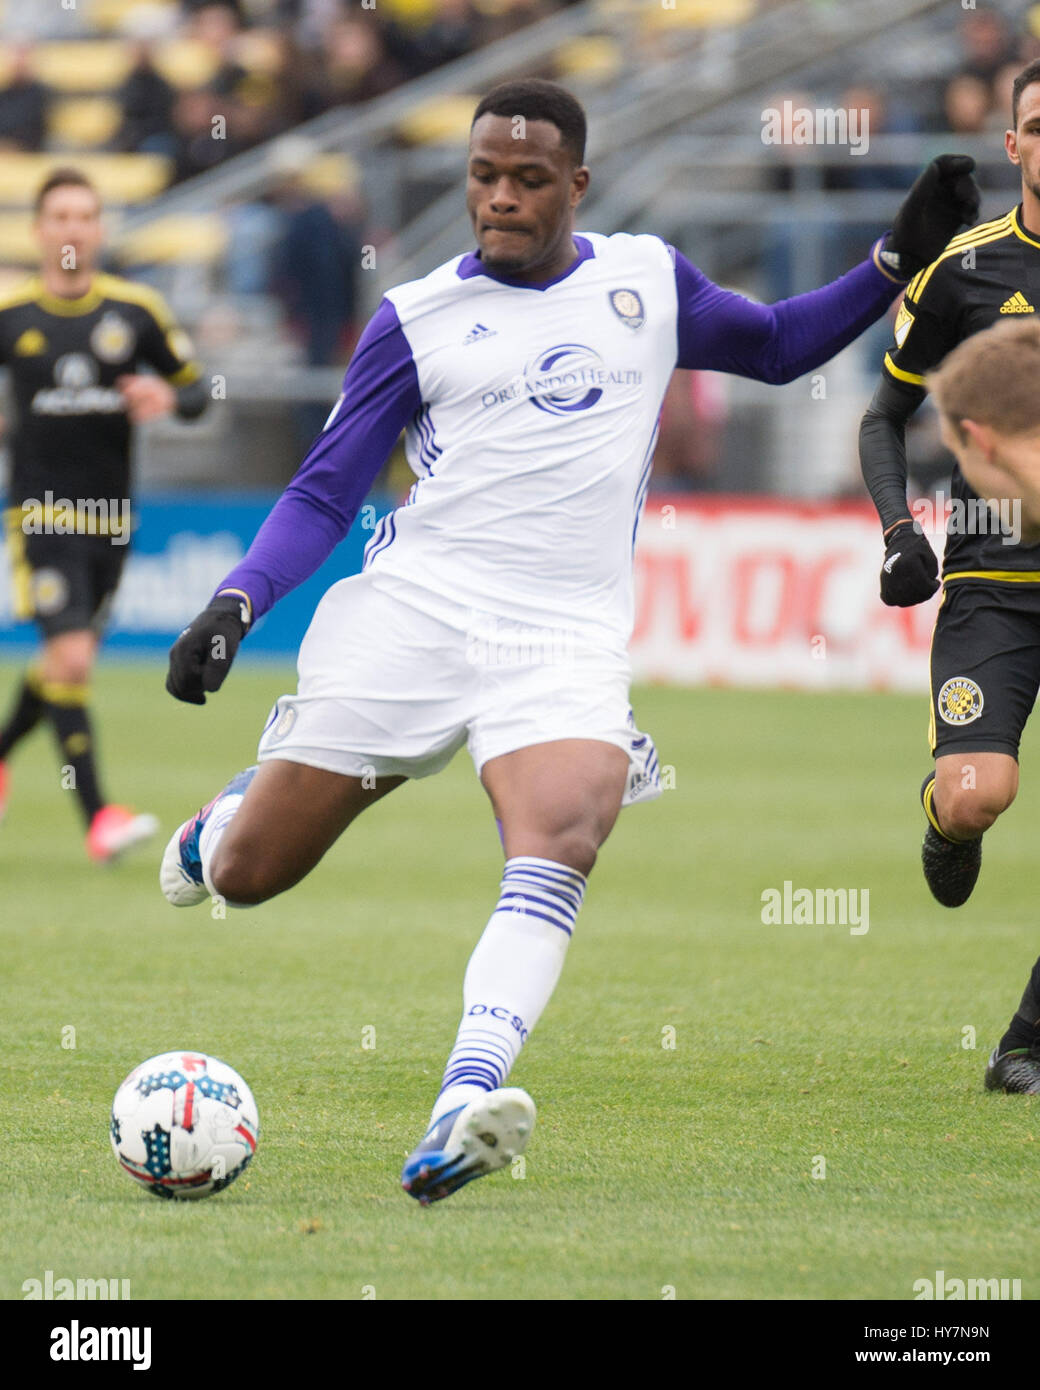 April 1, 2017:Orlando City SC forward Cyle Larin (9) takes a shot on goal against Columbus Crew SC in their match at Mapfre Stadium in Columbus, Ohio. Brent Clark/Alamy Stock Photo